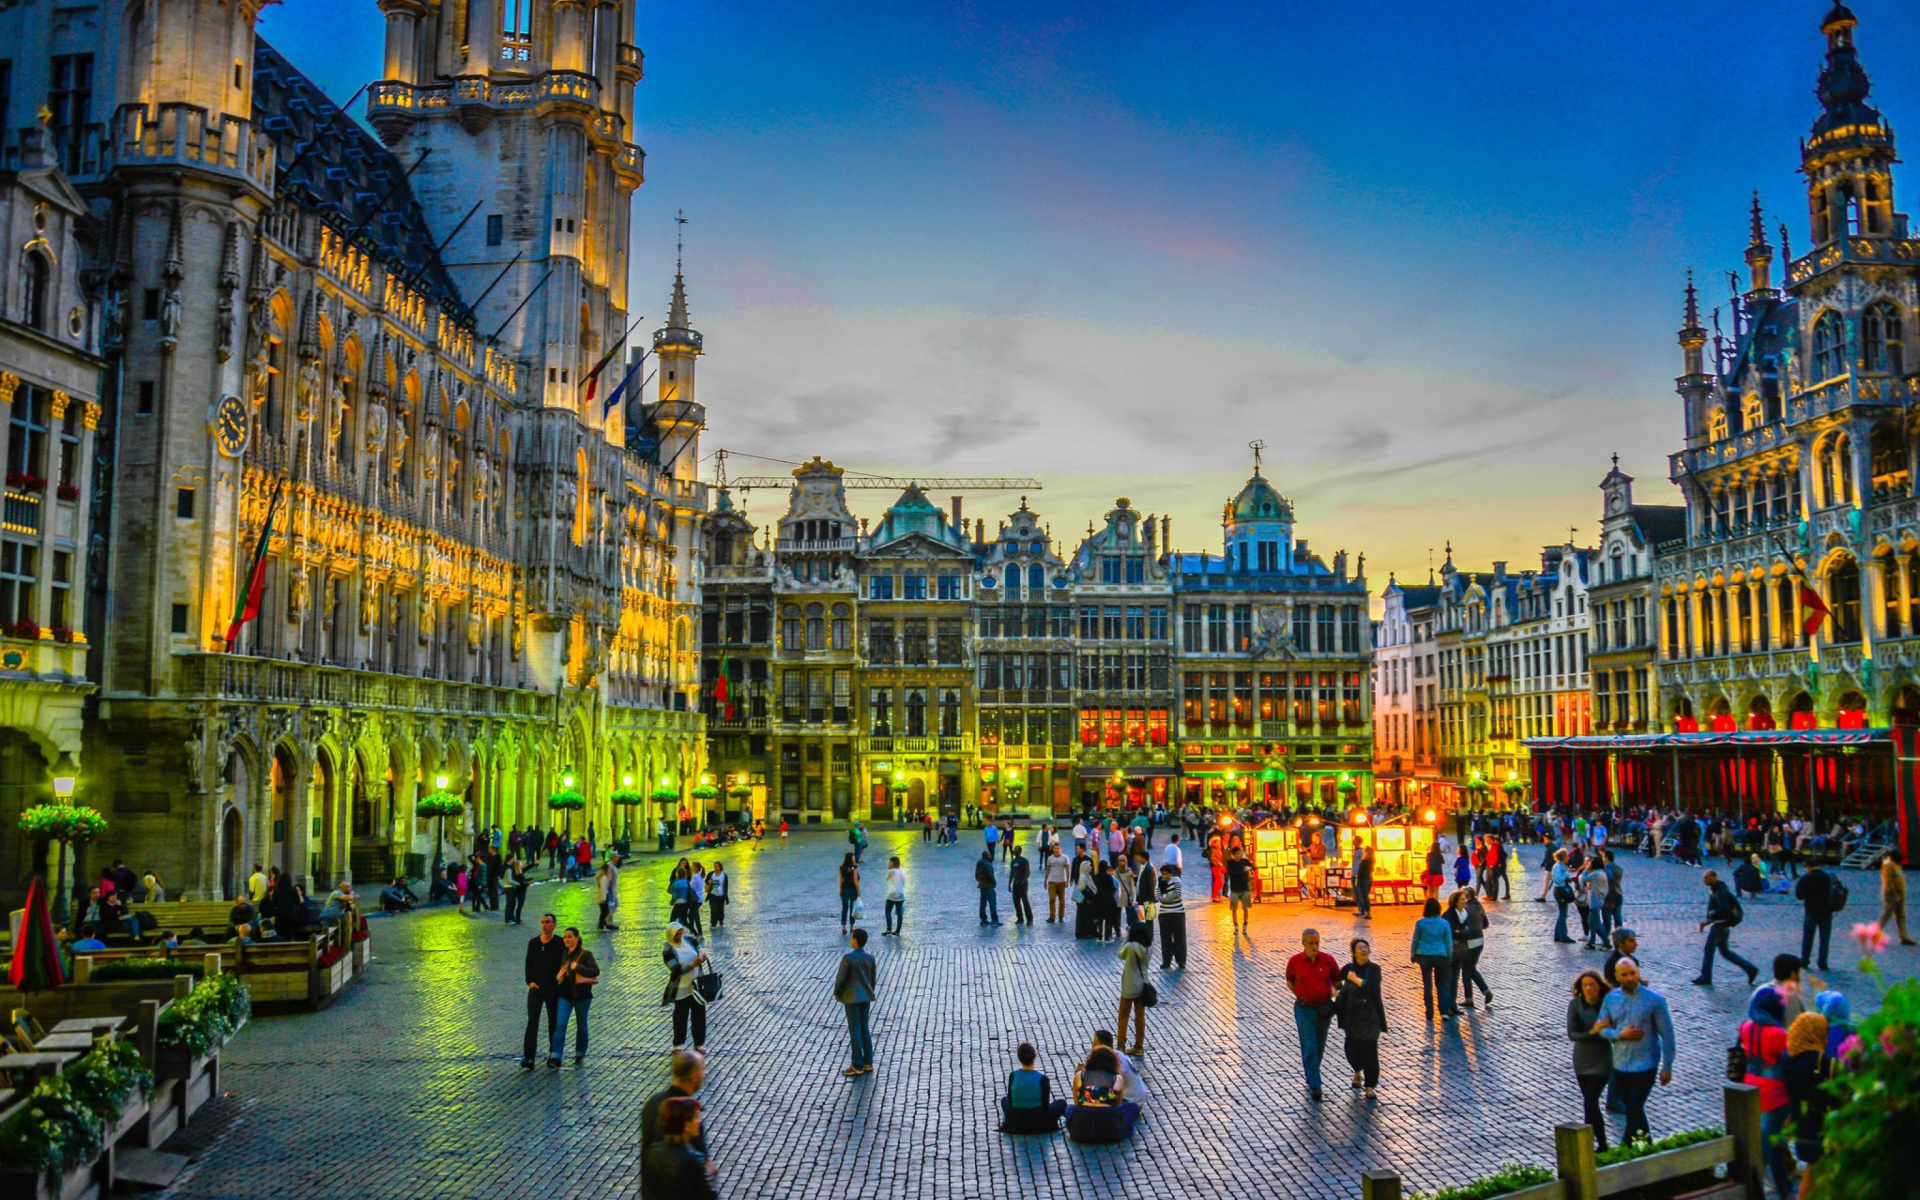 belgium, man made, brussels, architecture, building, city, dusk, square, cities